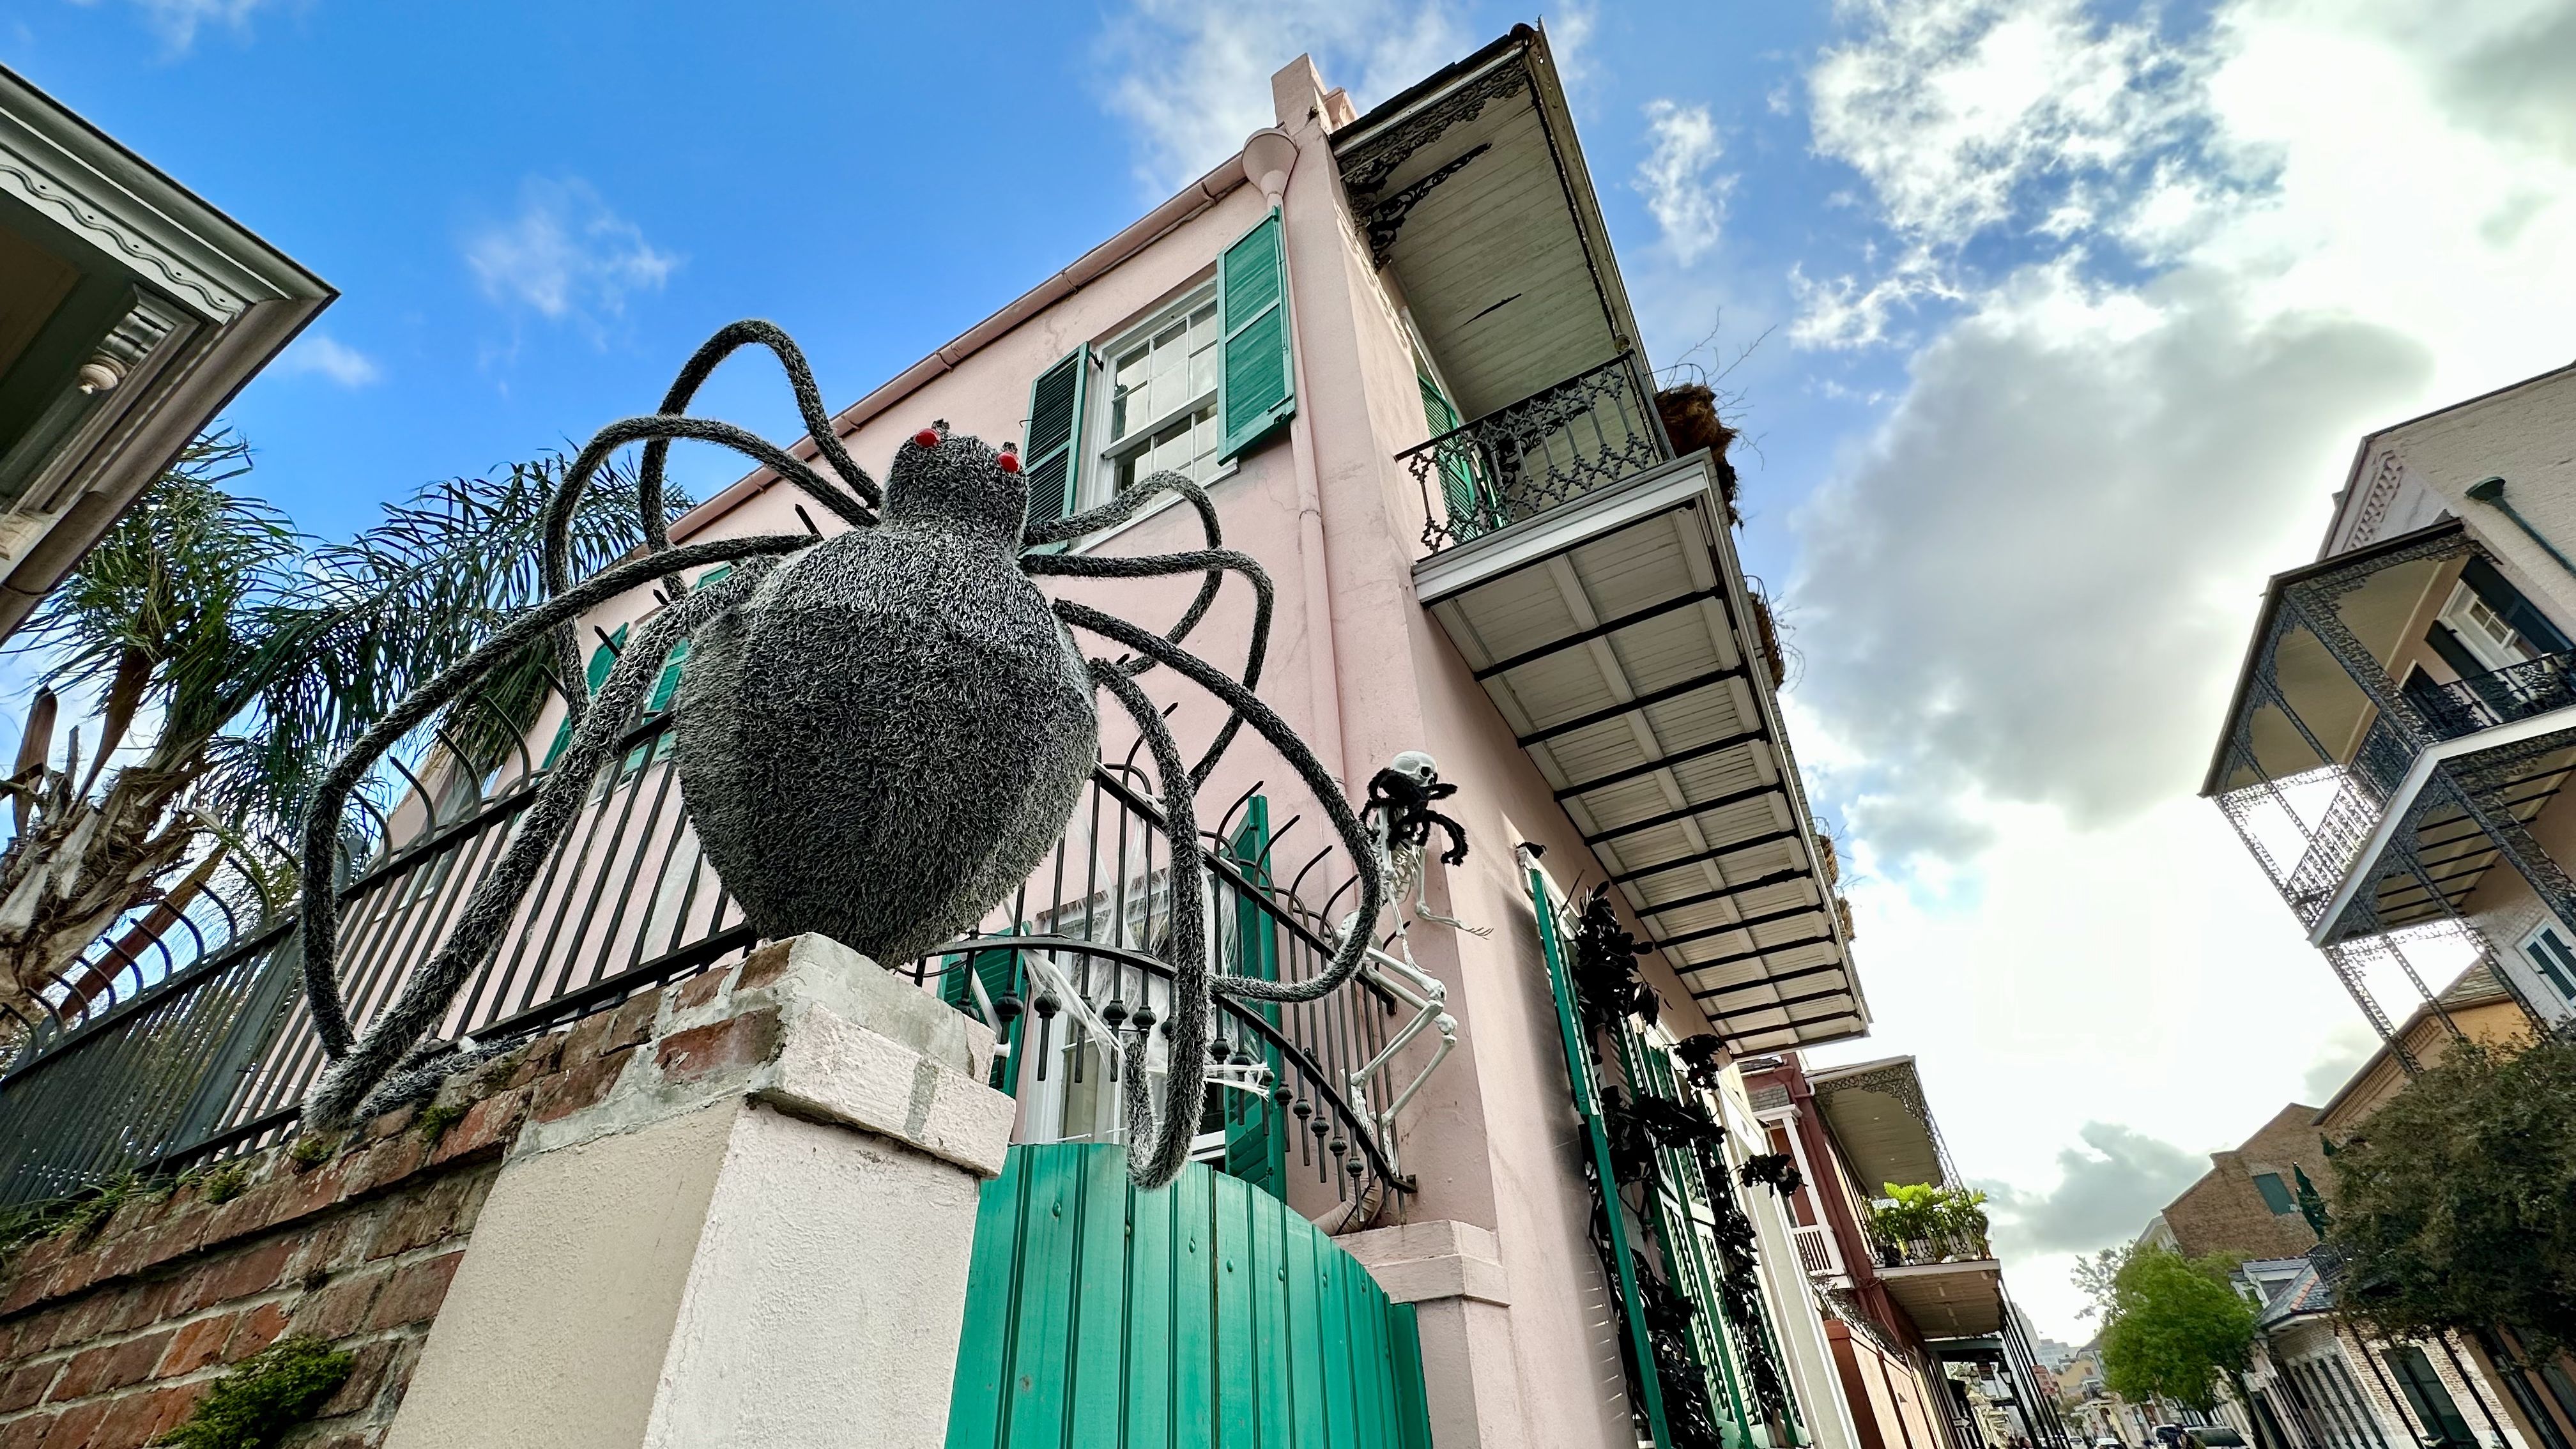 Photo shows a giant spider on the side of a French Quarter house